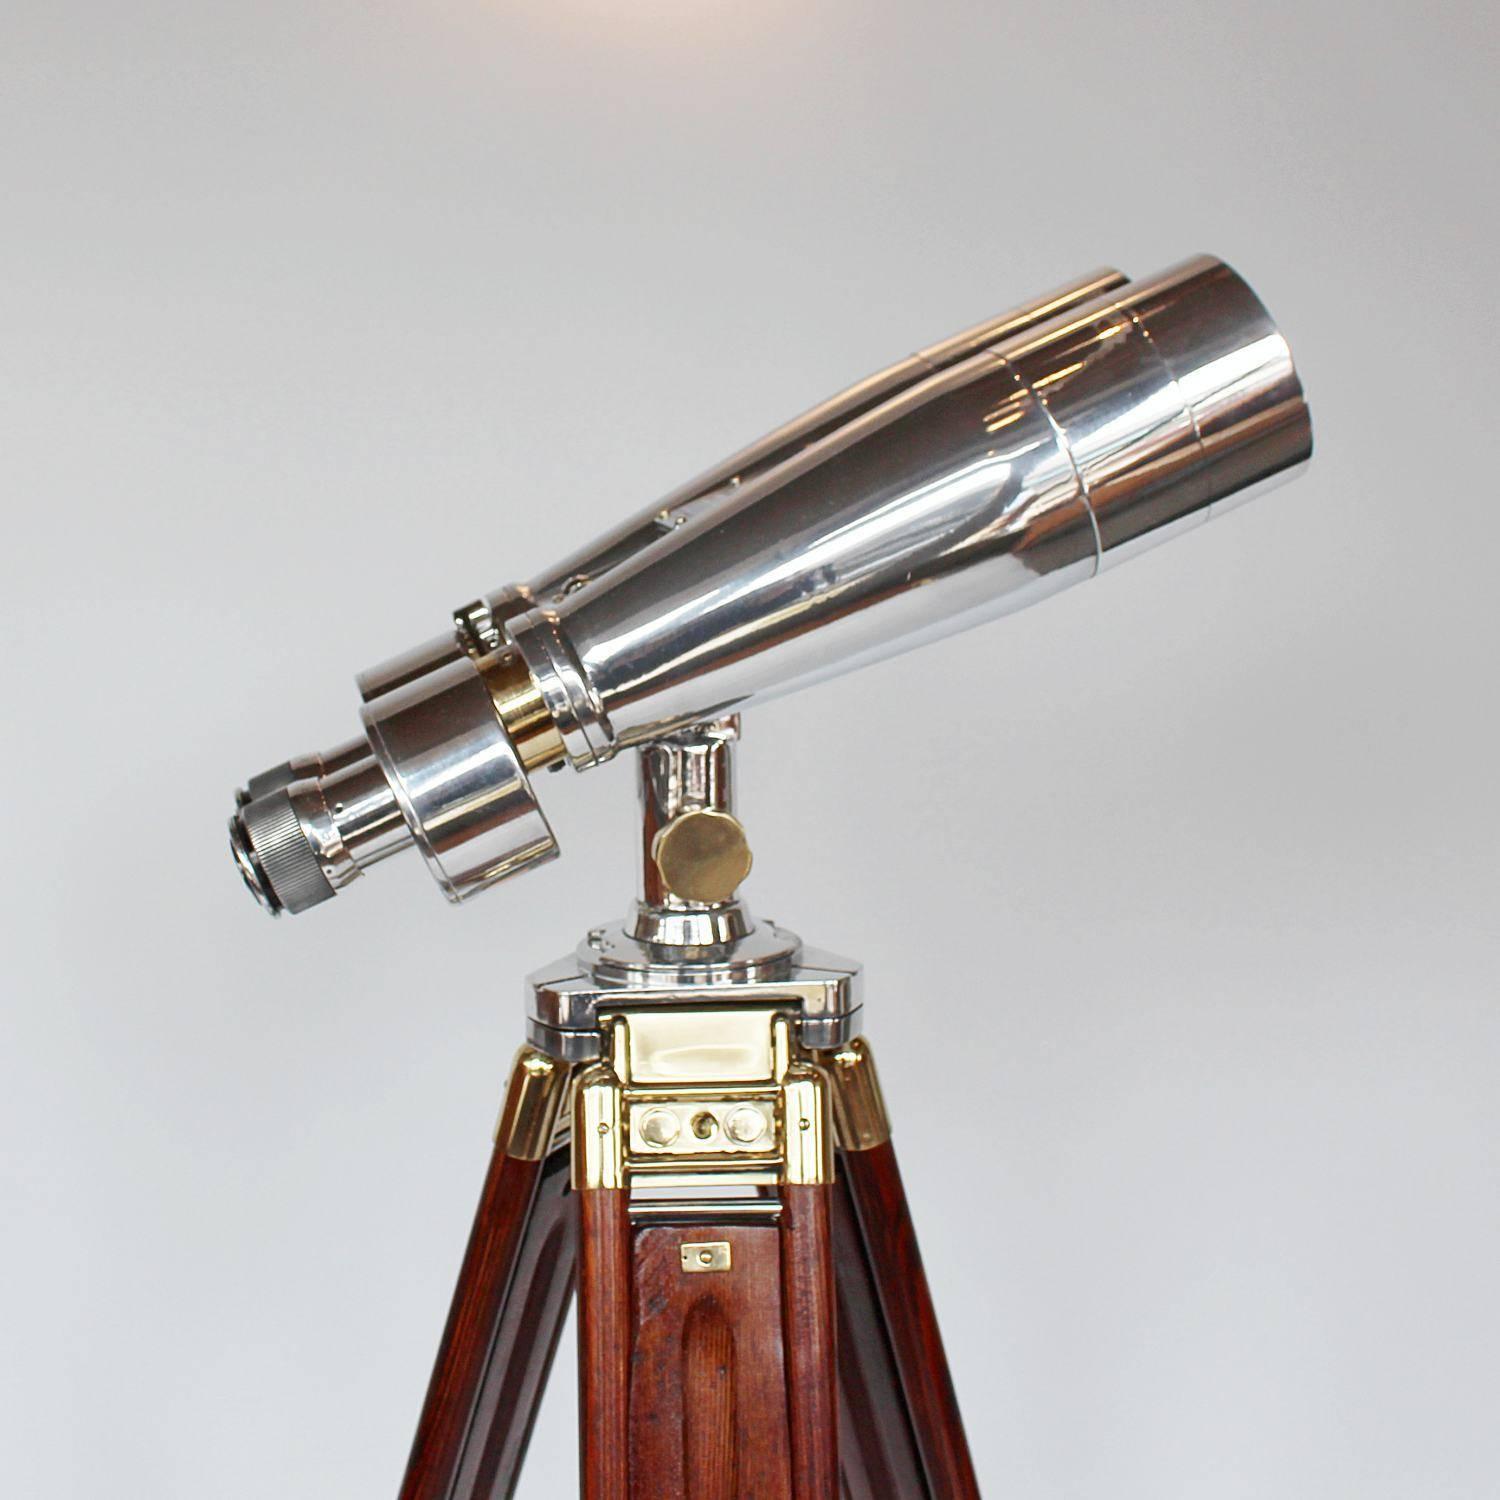 A pair of Fuji Meibo 15 x 80 marine binoculars on later extending wood and brass stand with chromed conical feet. 15 x magnification with 80 mm objective lens.
Paint stripped and metal polished. Fully refurbished optics

Stamped Fuji Meibo and